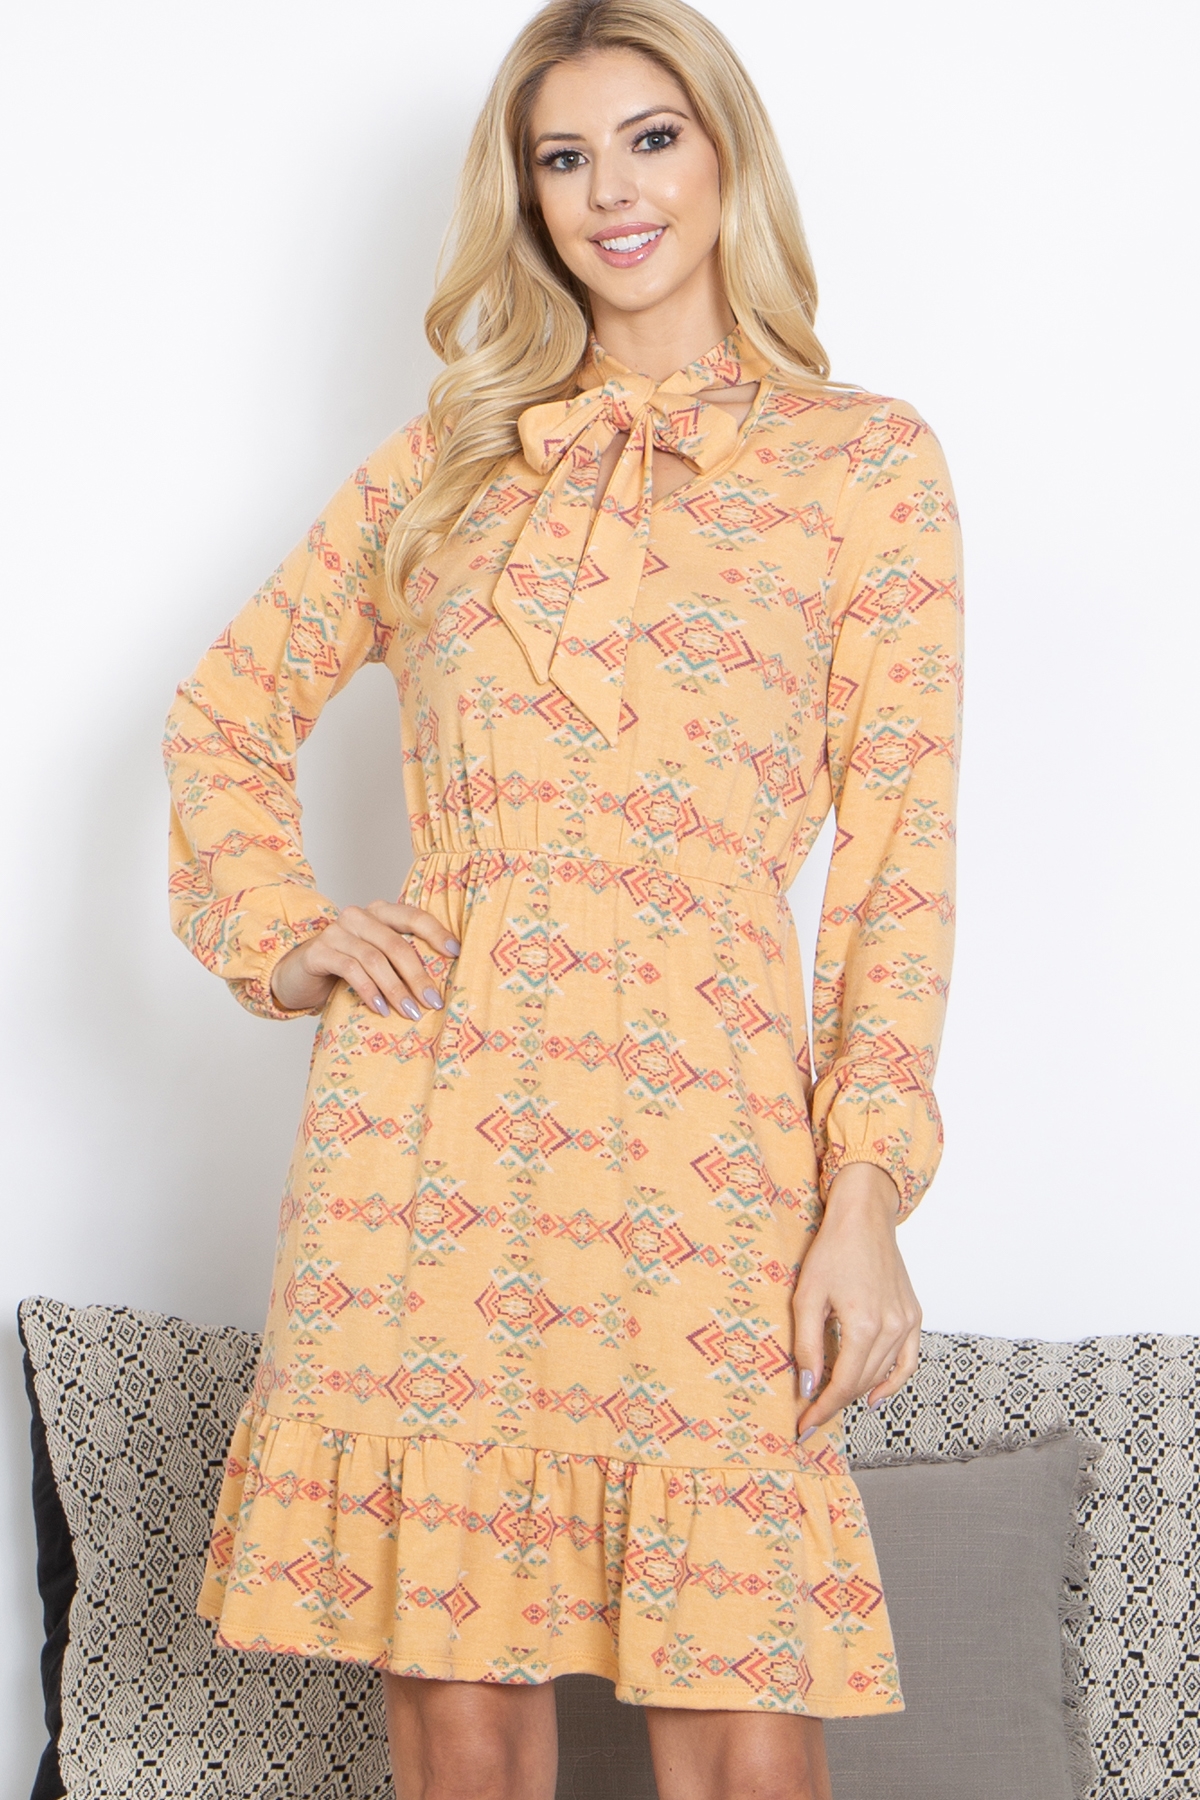 S11-11-1-PPD10515-YLW - RIBBON TIE NECKLINE LONG SLEEVE AZTEC PRINTED DRESS- YELLOW 1-2-2-2 (NOW $9.75 ONLY!)